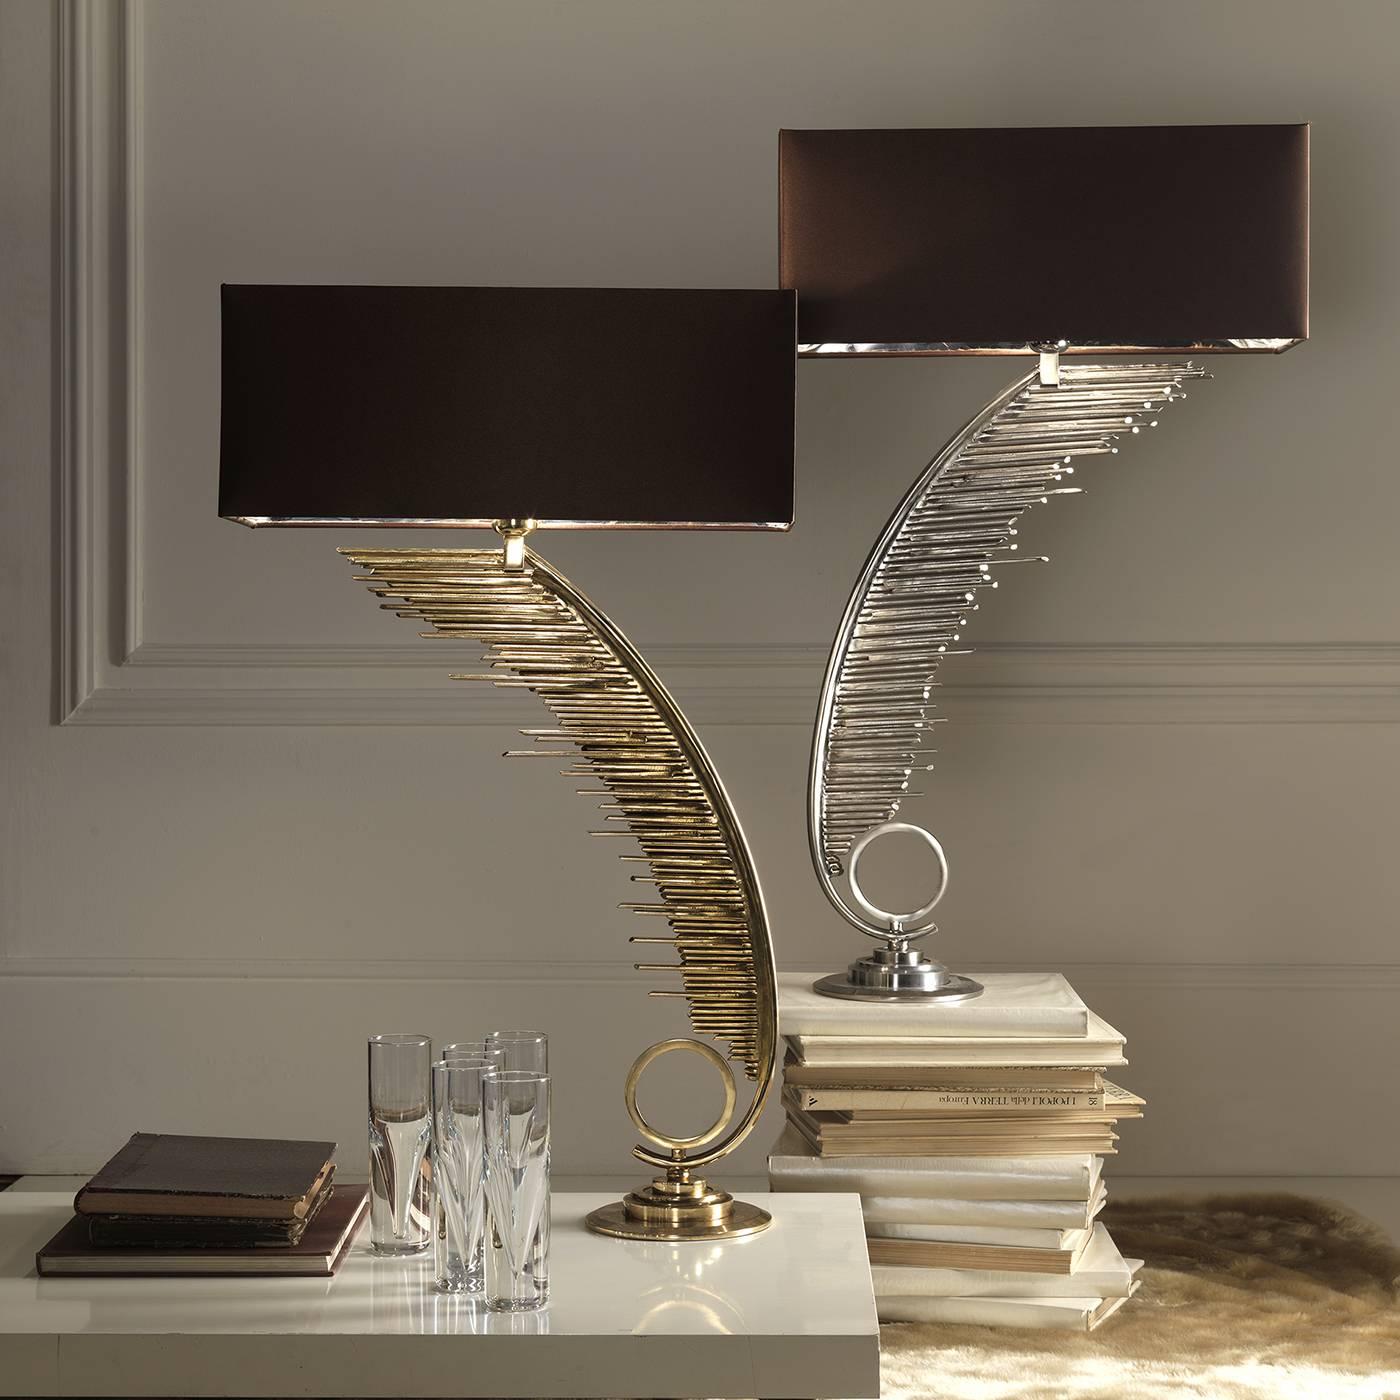 The central body of this exquisite and unique lamp consists of one sinuously curved iron rube, off of which a multitude of smaller iron tubes extend horizontally. At the base, a round platform features a circular element on its top. All iron